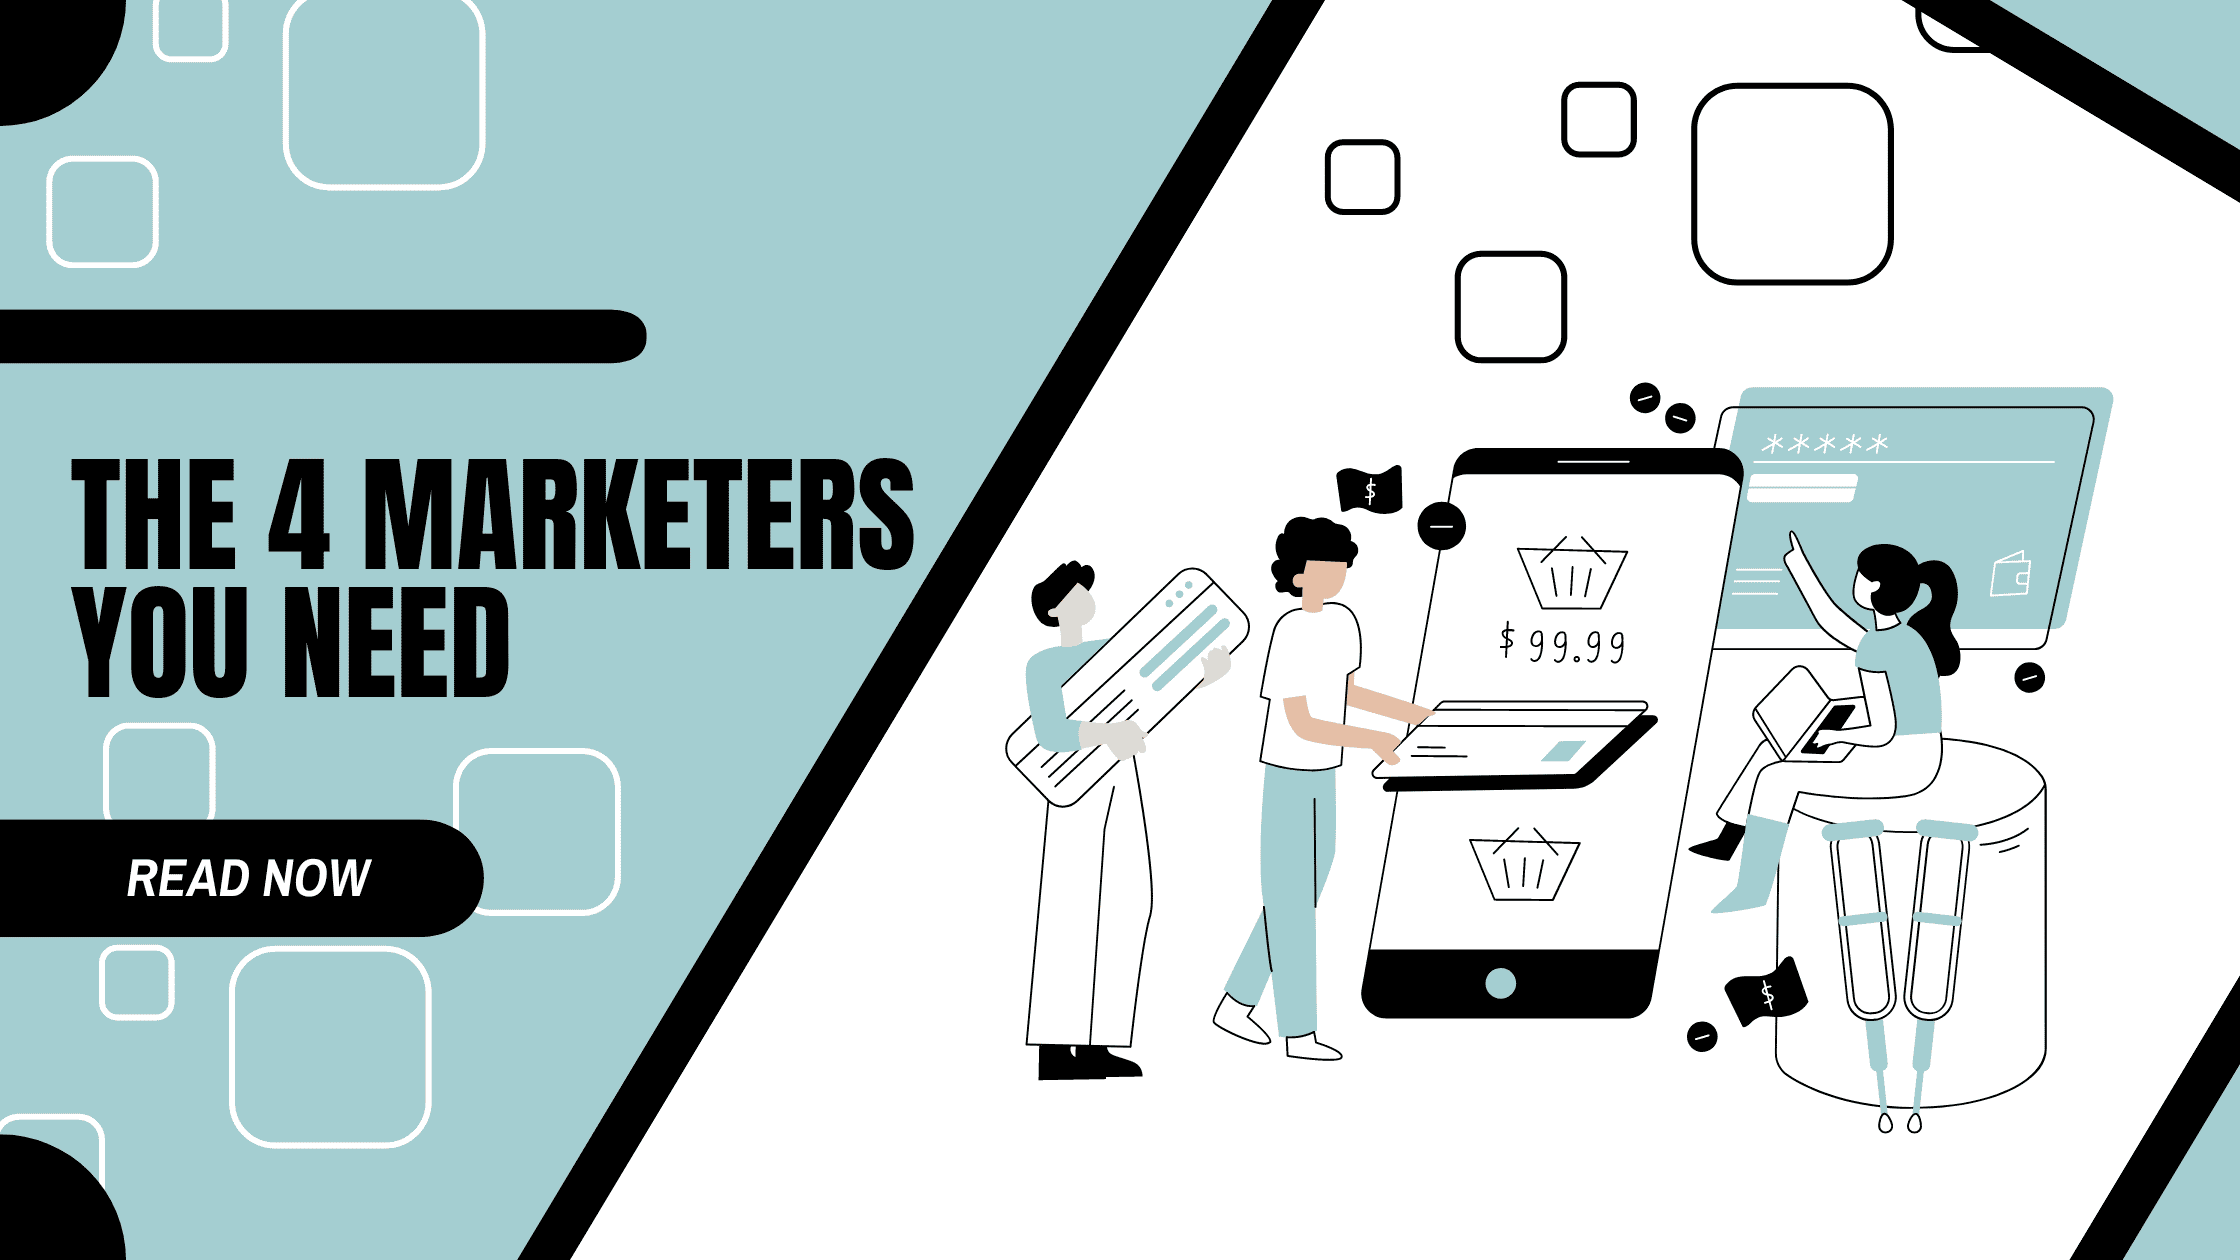 The 4 Marketers You Need